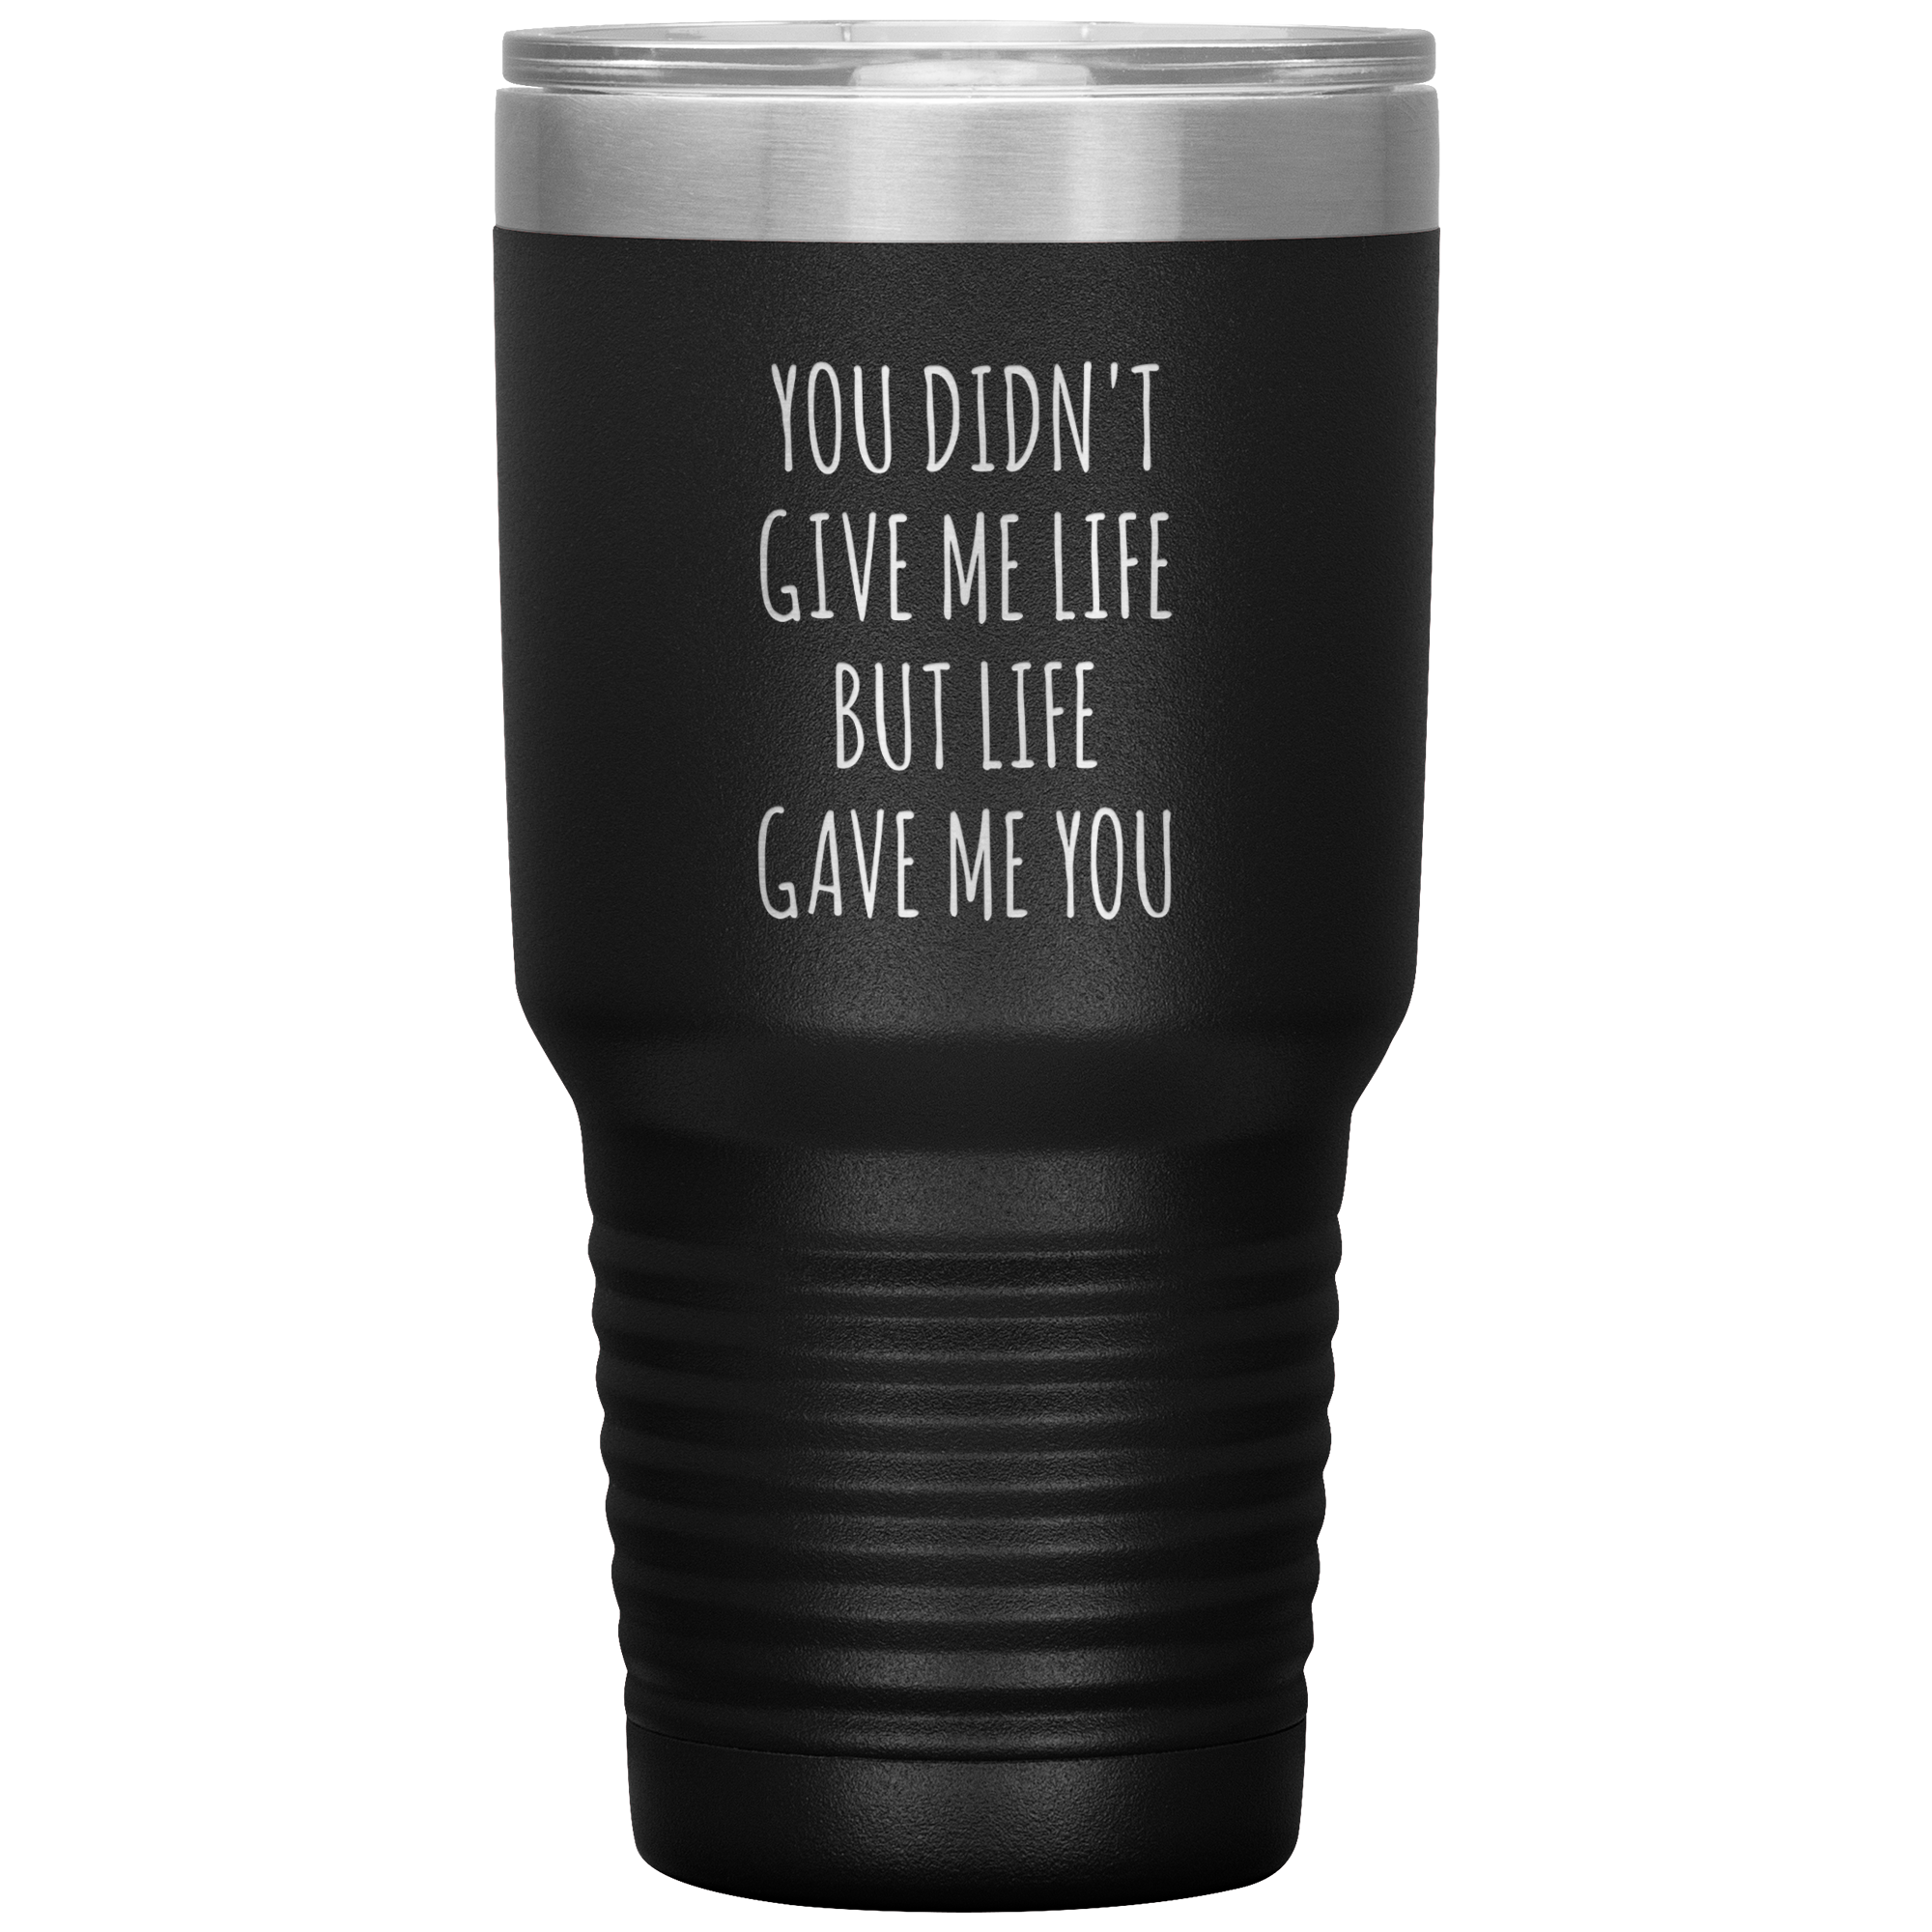 Adoptive Mom Gift Adopted Mother's Day Foster Parents Adoptive Parent Life Gave Me You Tumbler Insulated Hot Cold Travel Coffee Cup BPA Free